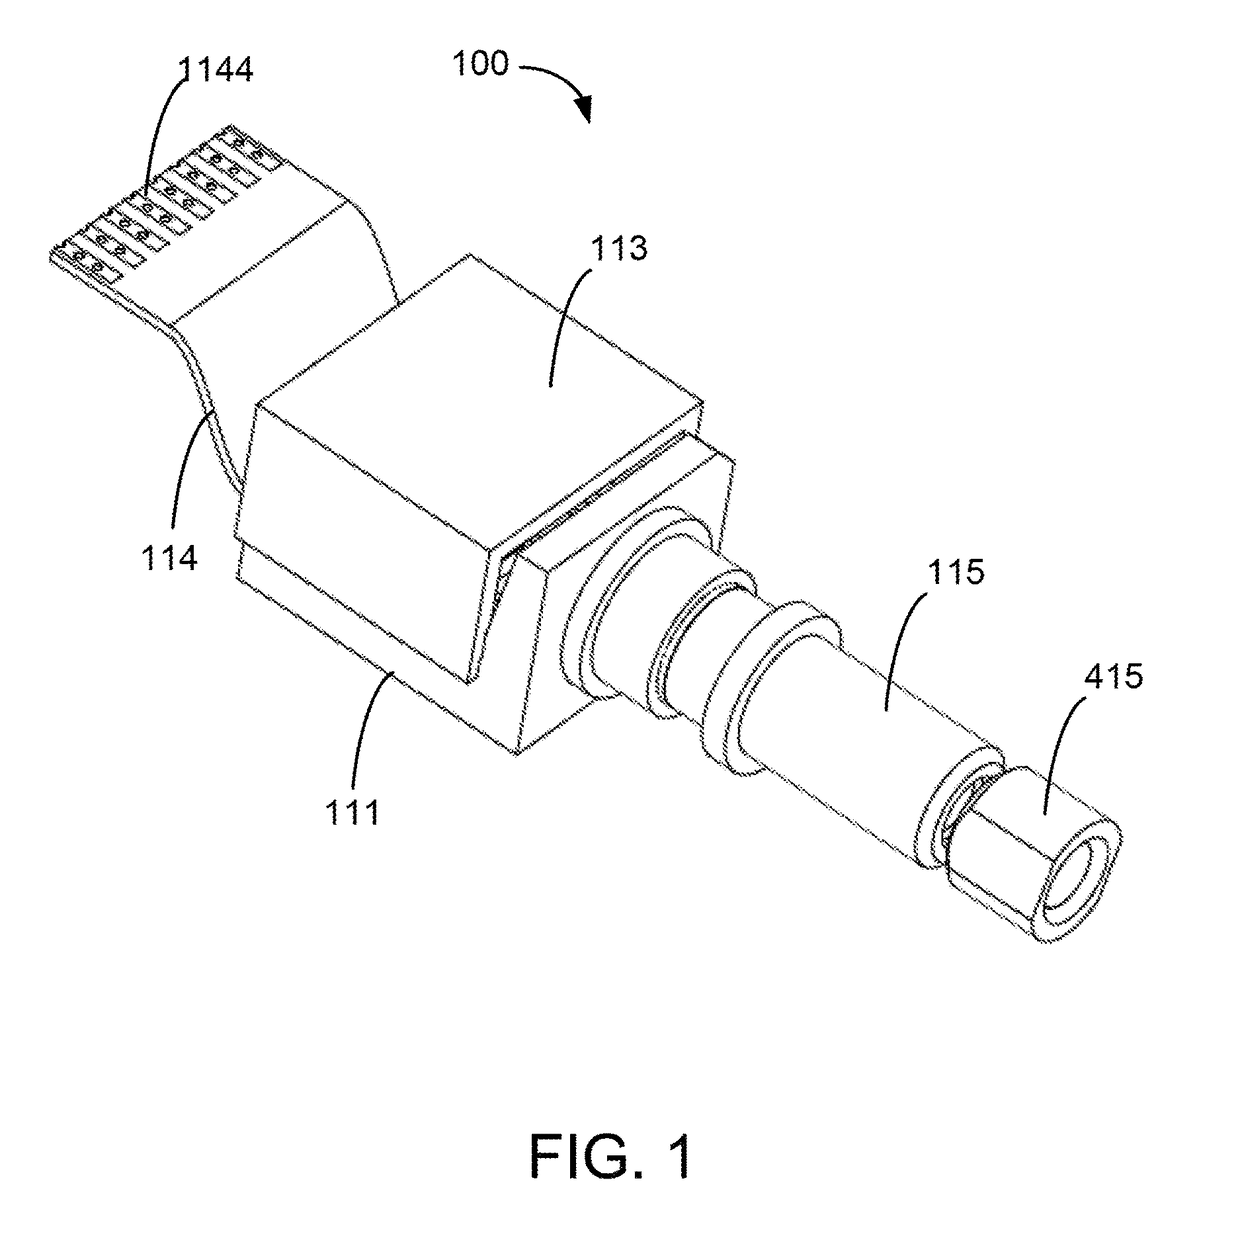 Small form factor transmitting device